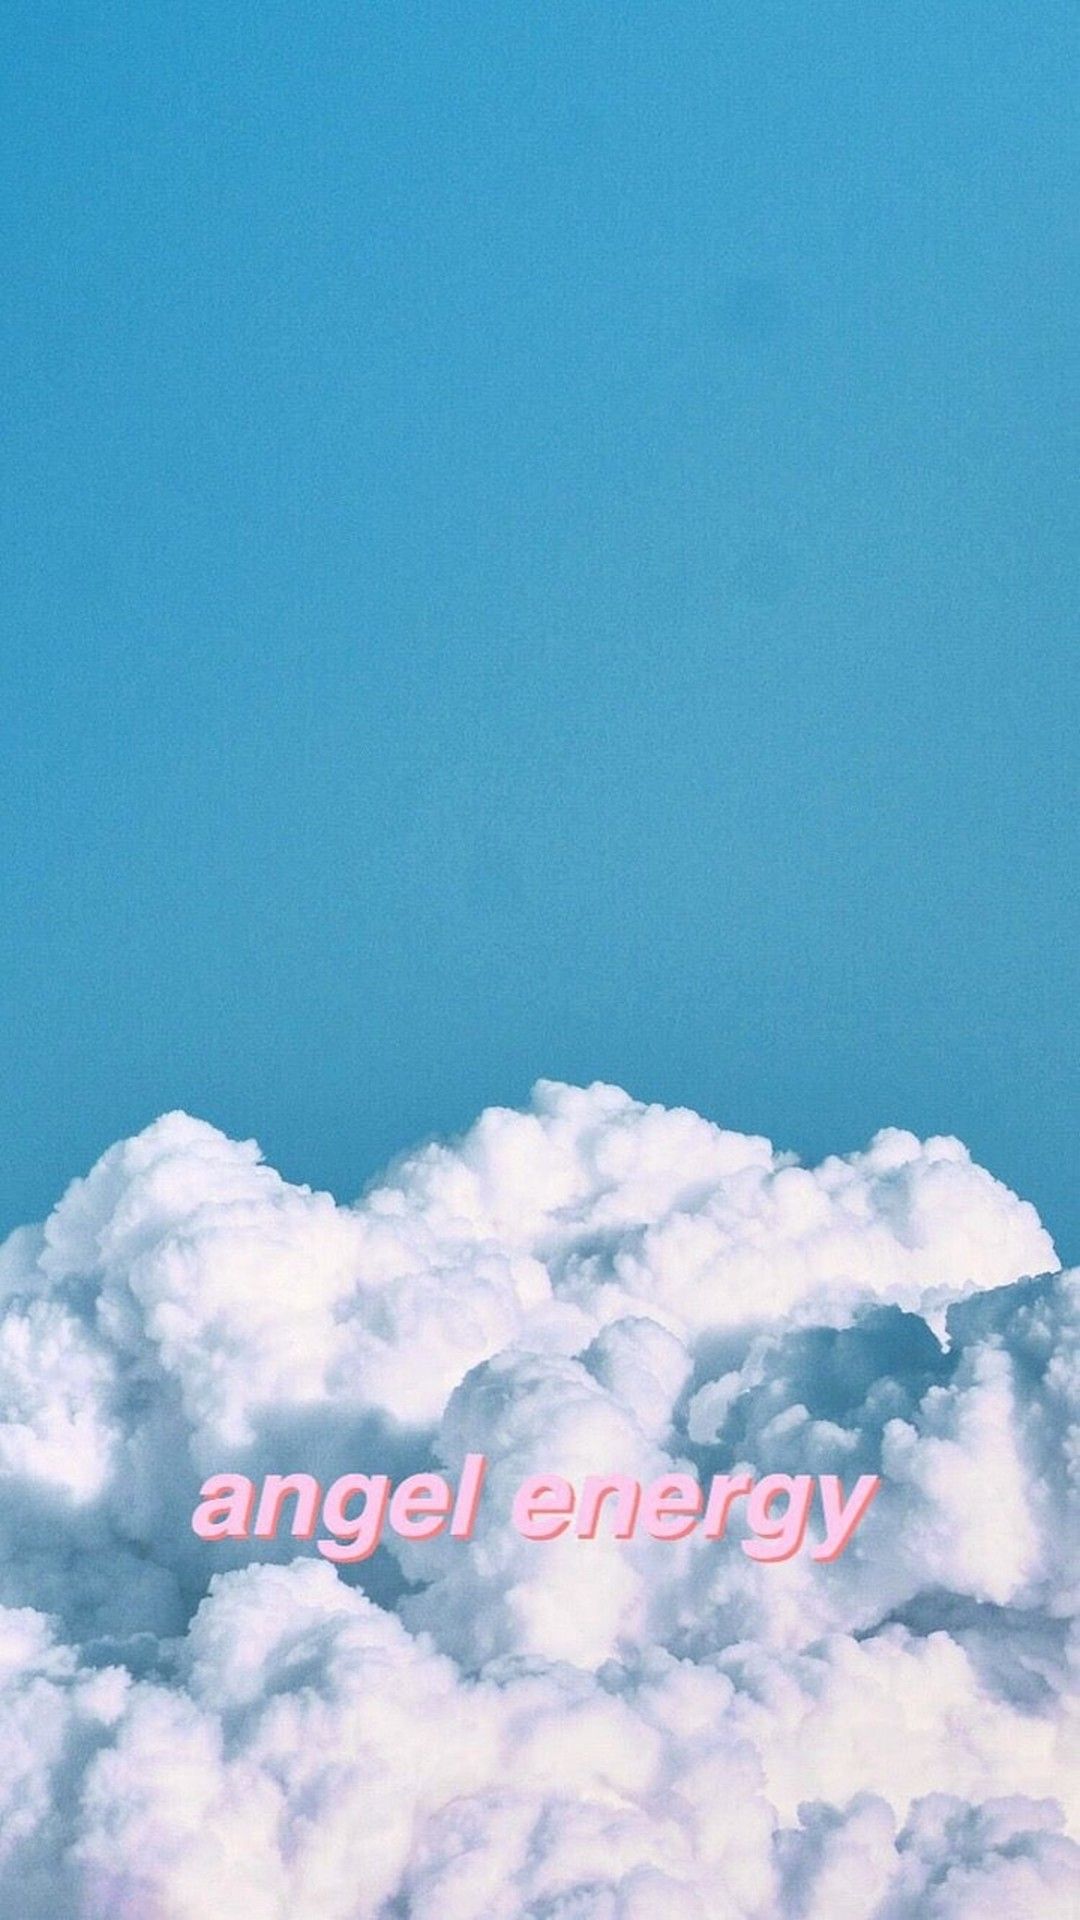 Aesthetic phone background of a blue sky with white clouds - Cute iPhone, angels, February